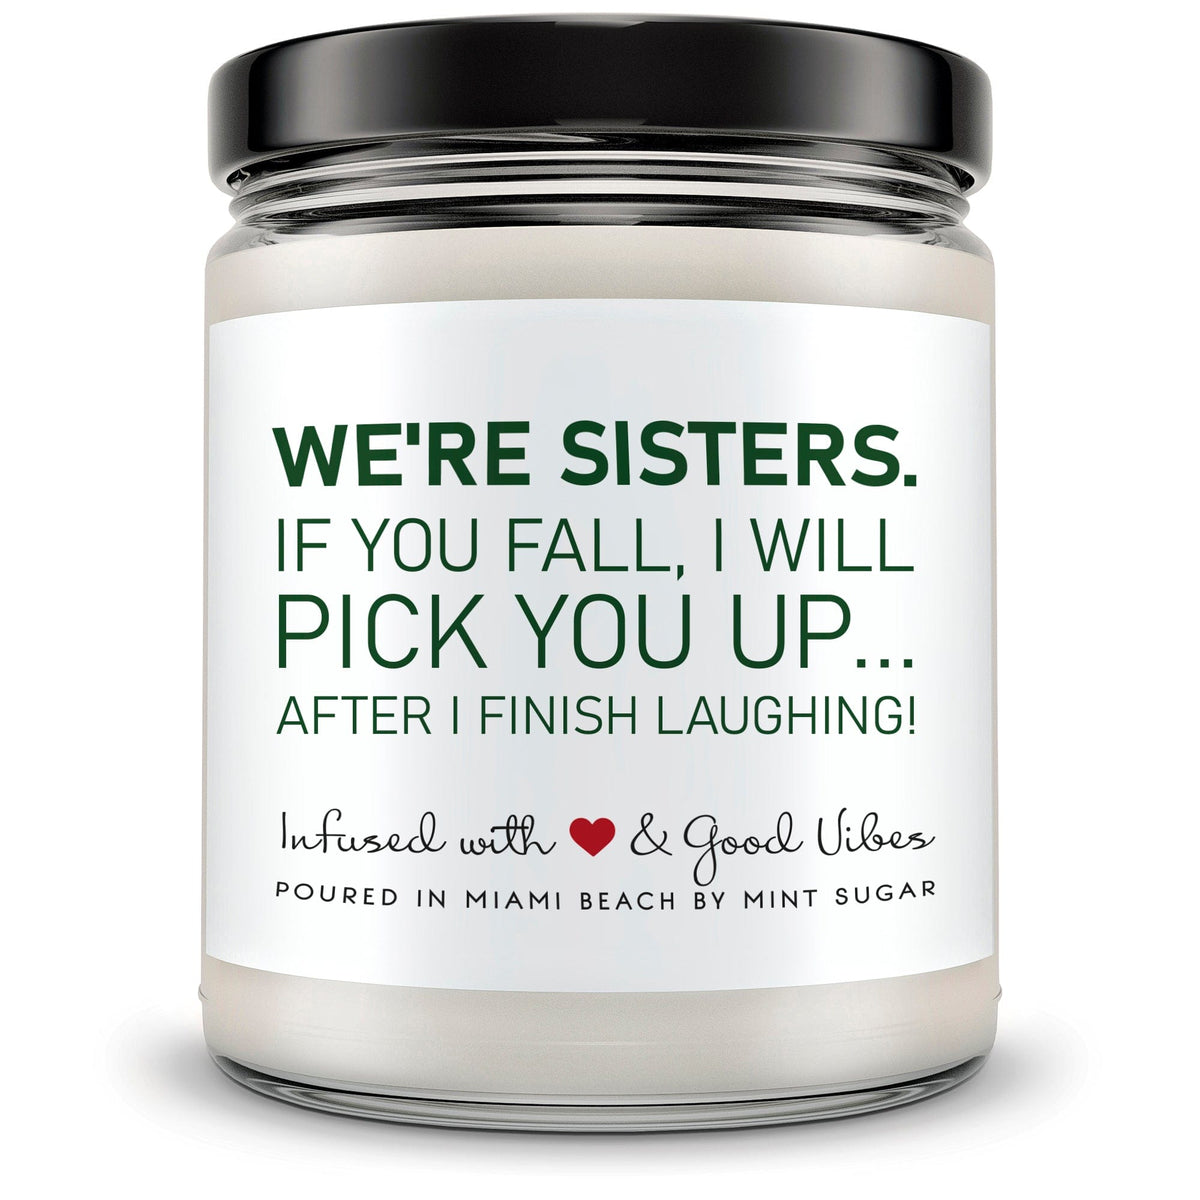 We're sisters. If you fall, I will pick you up... after I finish laughing - Mint Sugar Candle